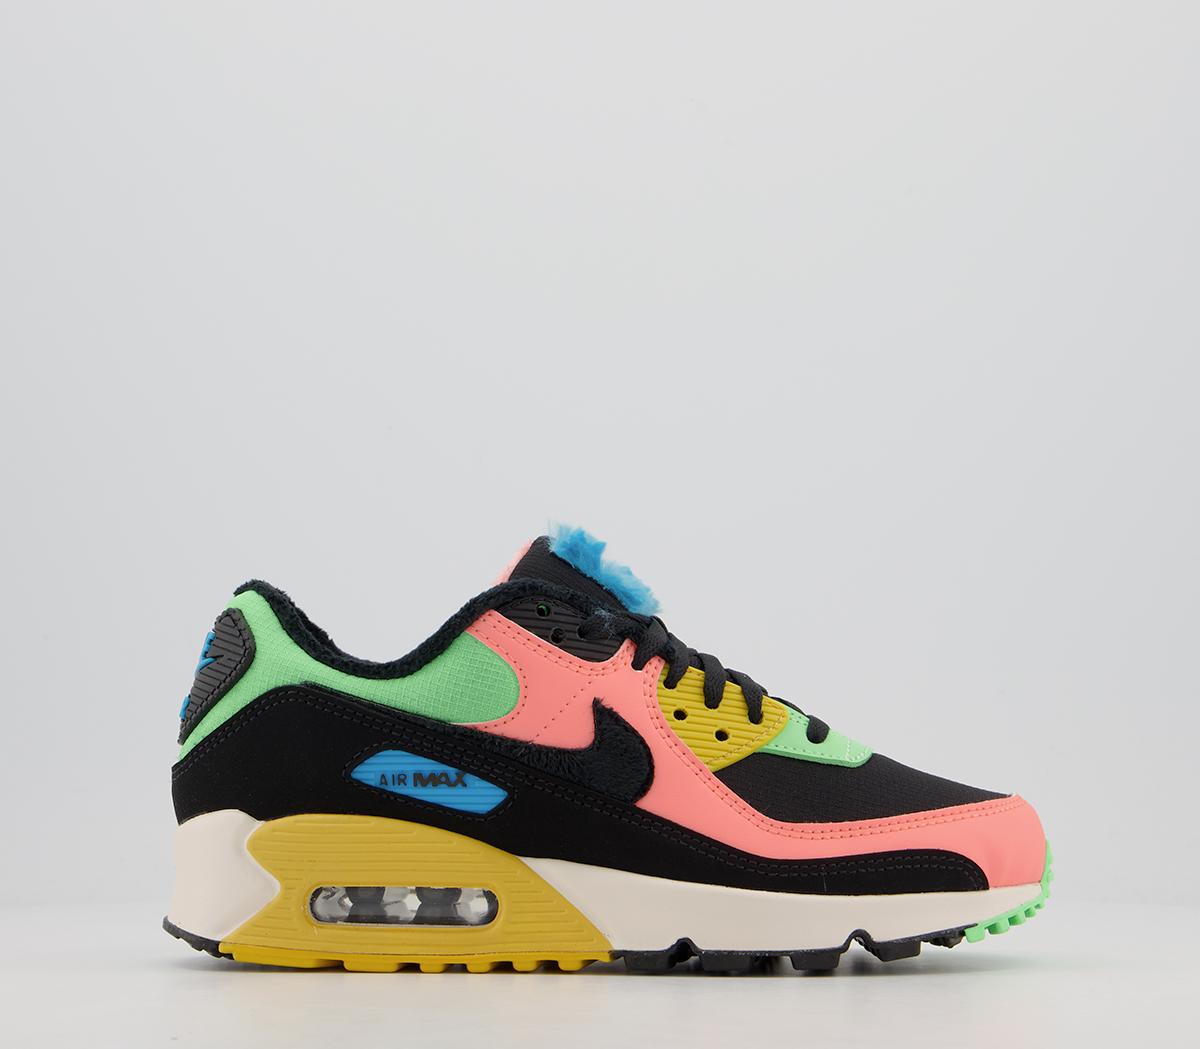 Nike Air Max 90 Trainers Atomic Pink Laser Blue Solar Flare - Women's ...